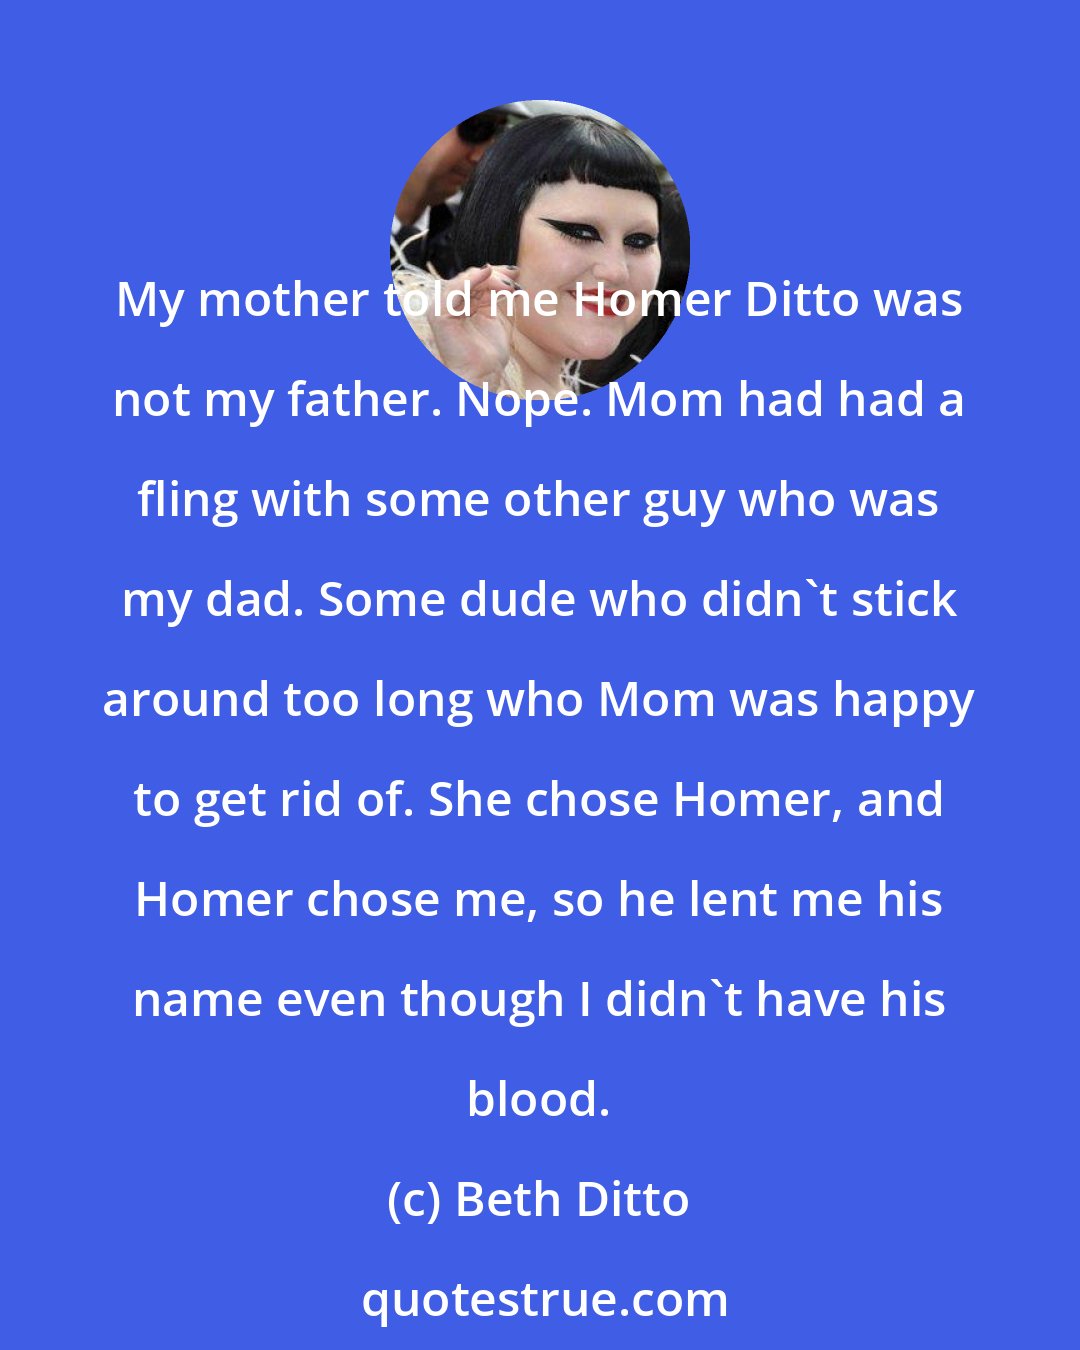 Beth Ditto: My mother told me Homer Ditto was not my father. Nope. Mom had had a fling with some other guy who was my dad. Some dude who didn't stick around too long who Mom was happy to get rid of. She chose Homer, and Homer chose me, so he lent me his name even though I didn't have his blood.